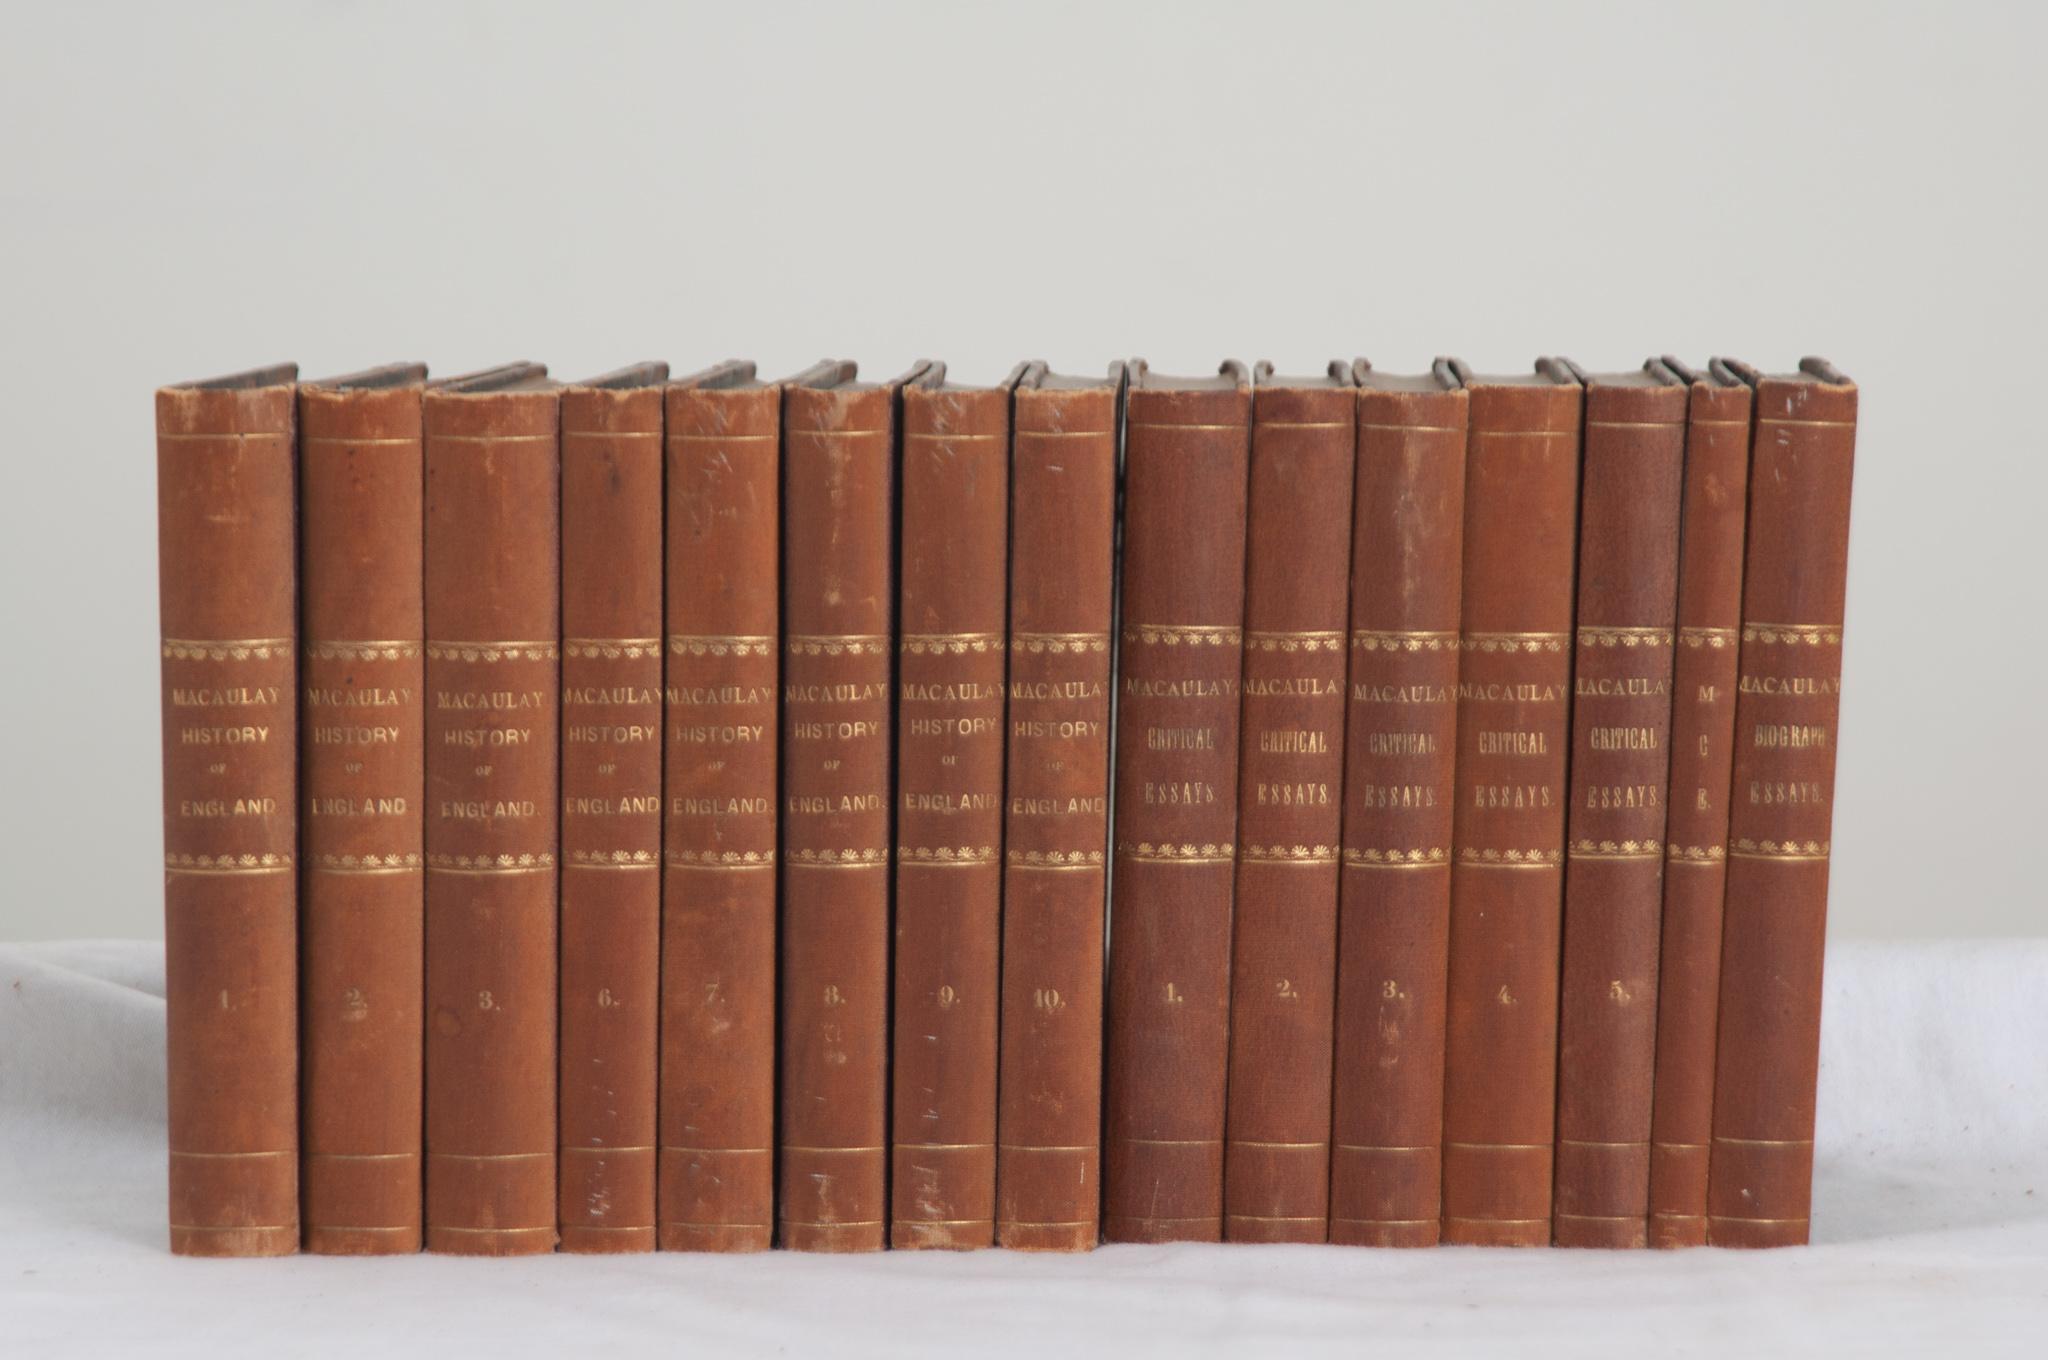 Other Set of 15 Books on the History of England